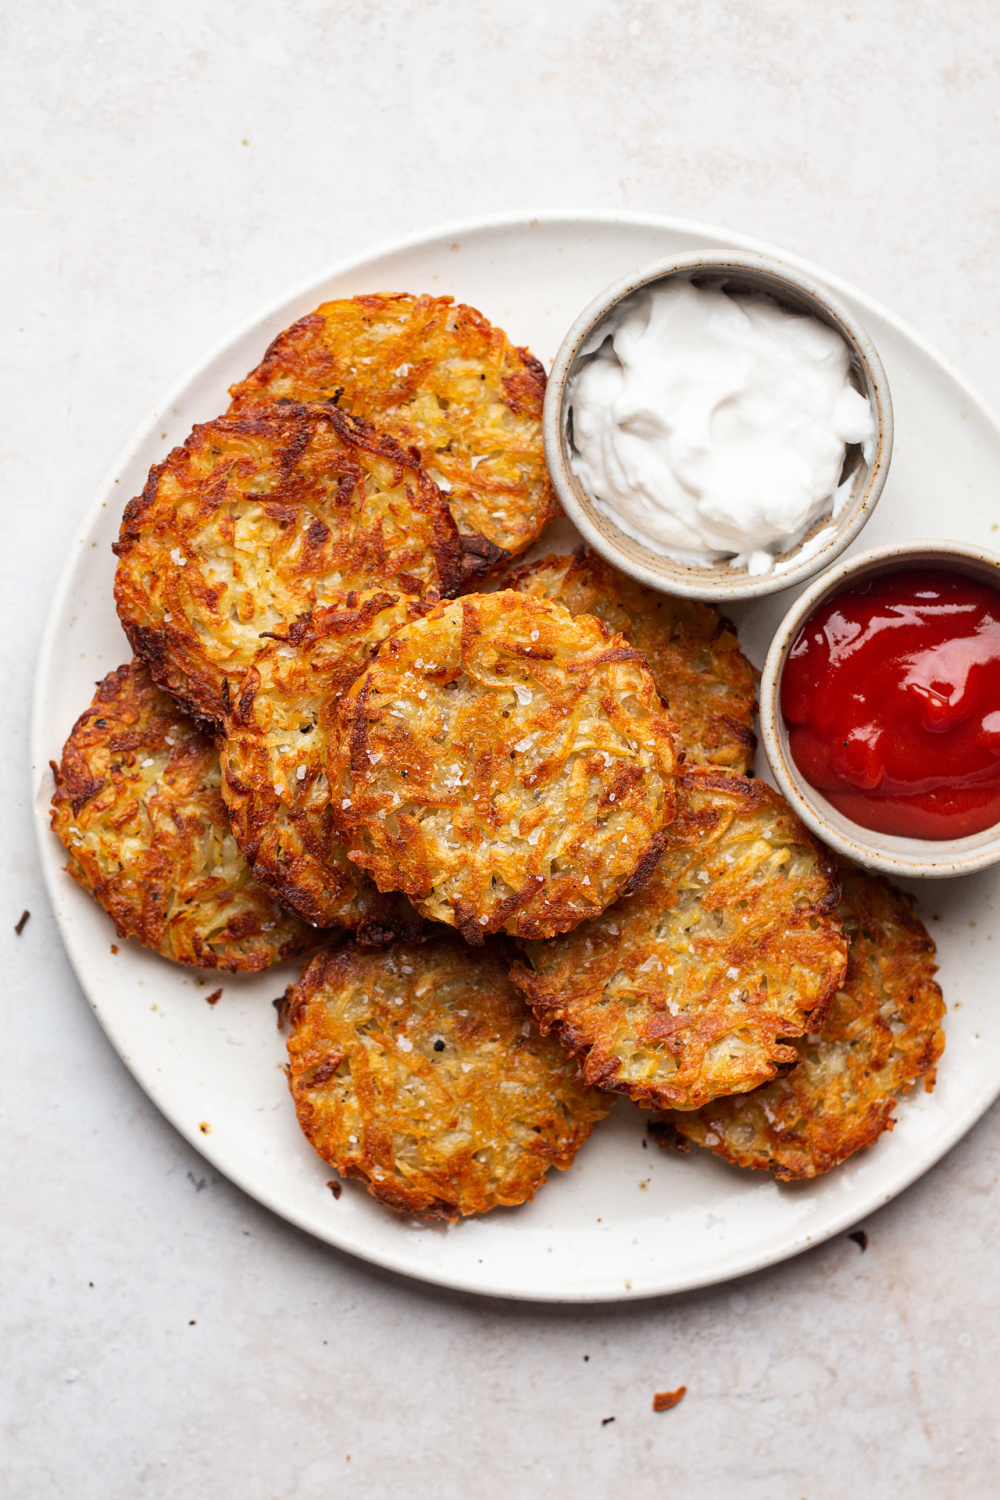 Vegan Hash Browns (Gluten-Free Recipe with Baked Oil-Free Option)